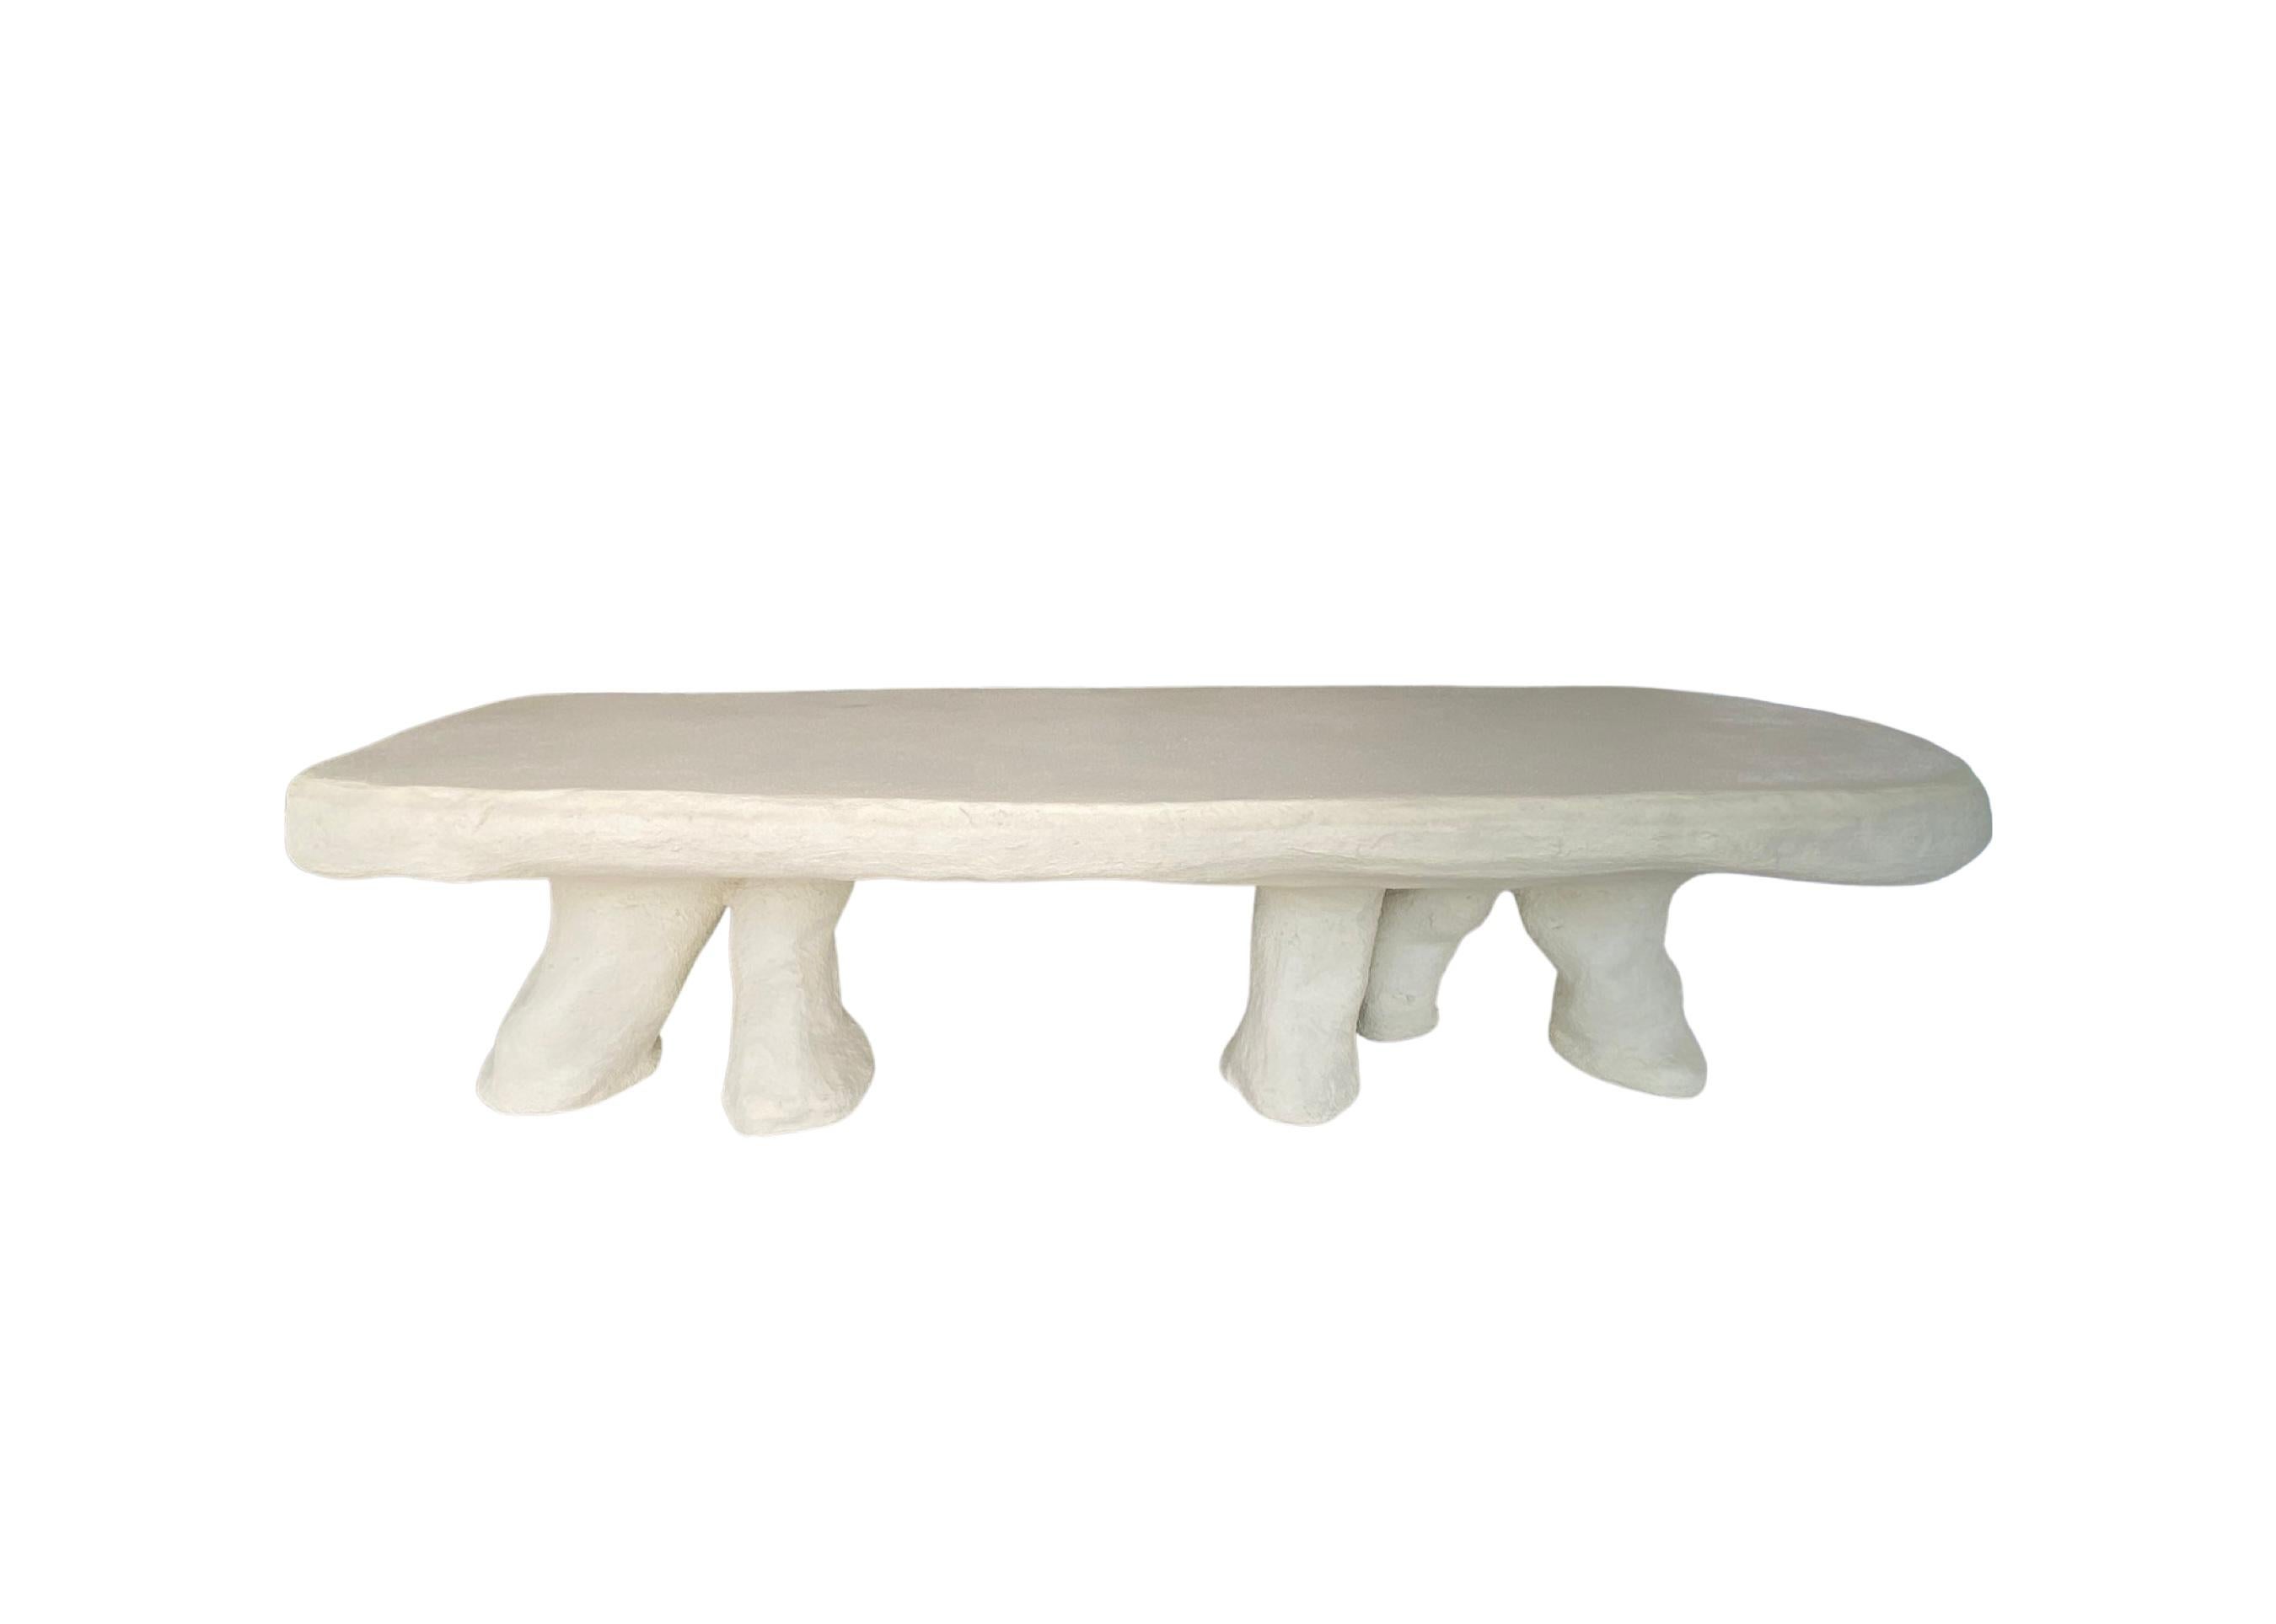 Dumbo dining table by Mary-Lynn & Carlo
The Elephant Project
Dimensions: H 76 x W 315 x D 110 cm
Materials: Concrete colored, foam polystyrene
Finish: Water, stains repellent

MARYLYNN AND CARLO

The Massoud siblings have been experimenting